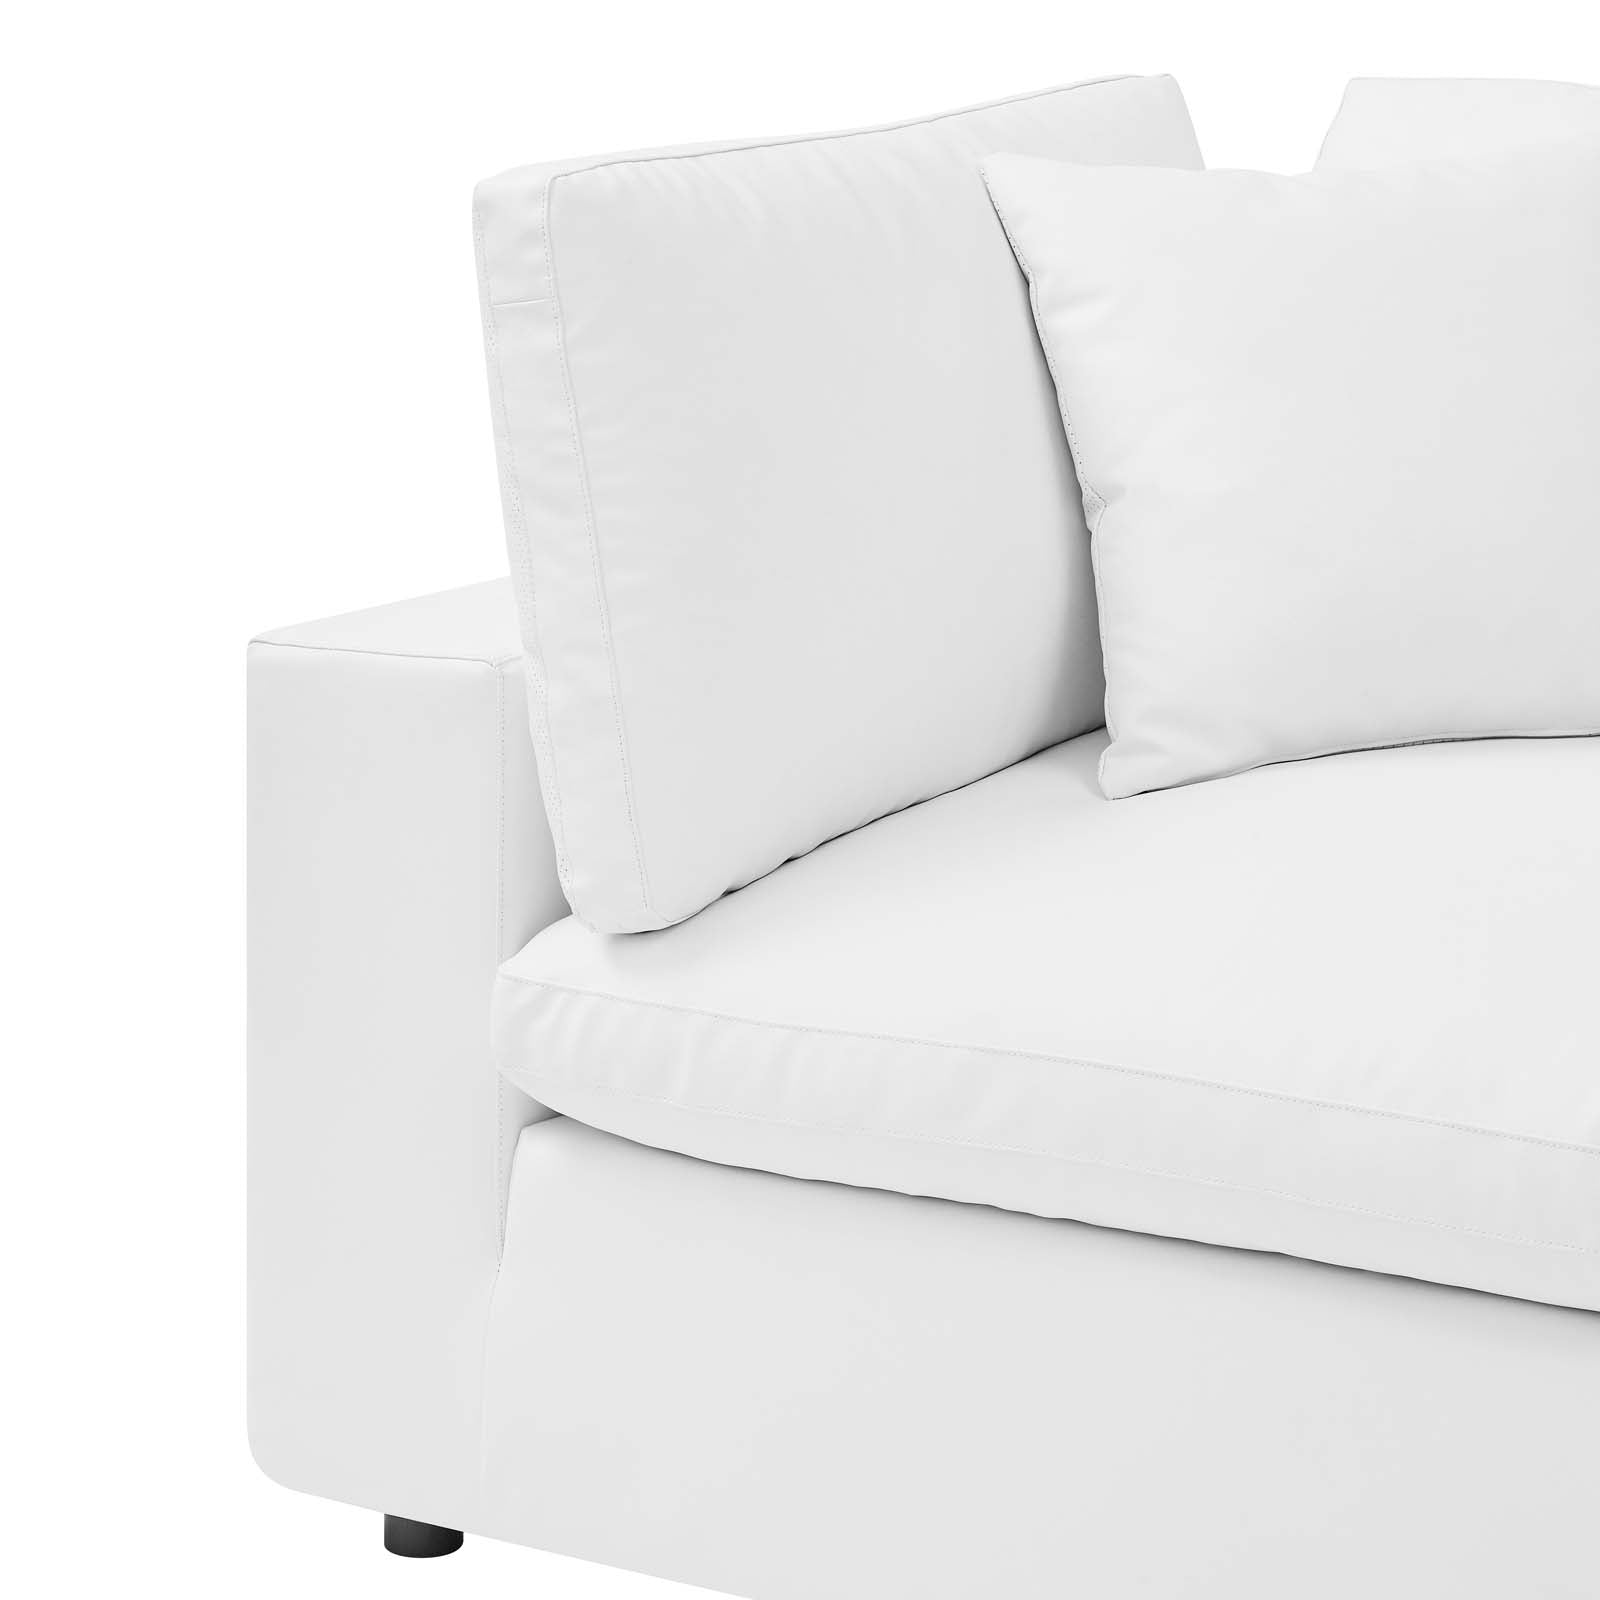 Modway Accent Chairs - Commix Down Filled Overstuffed Vegan Leather Corner Chair White